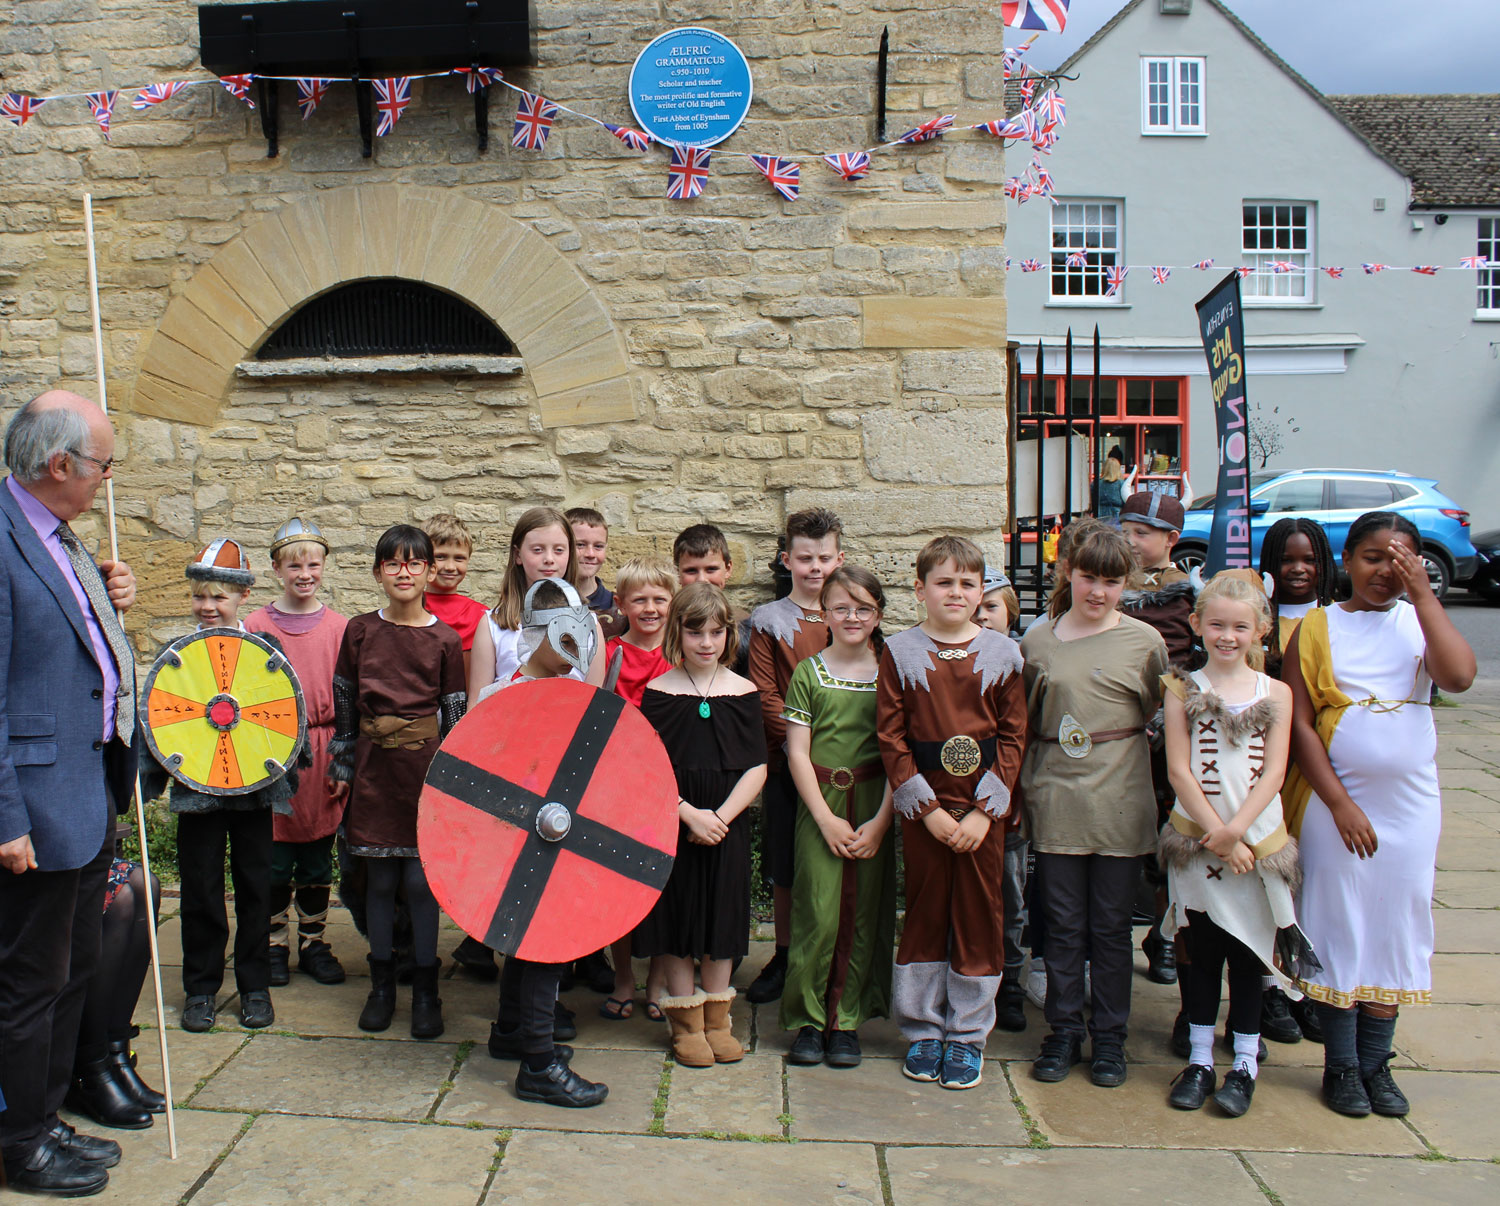 Children from Eynsham Primary School, dressed in medieval costumes, at the unveiling of the Blue Plaque to memorialise Aelfric, first Abbot of Eynsham.